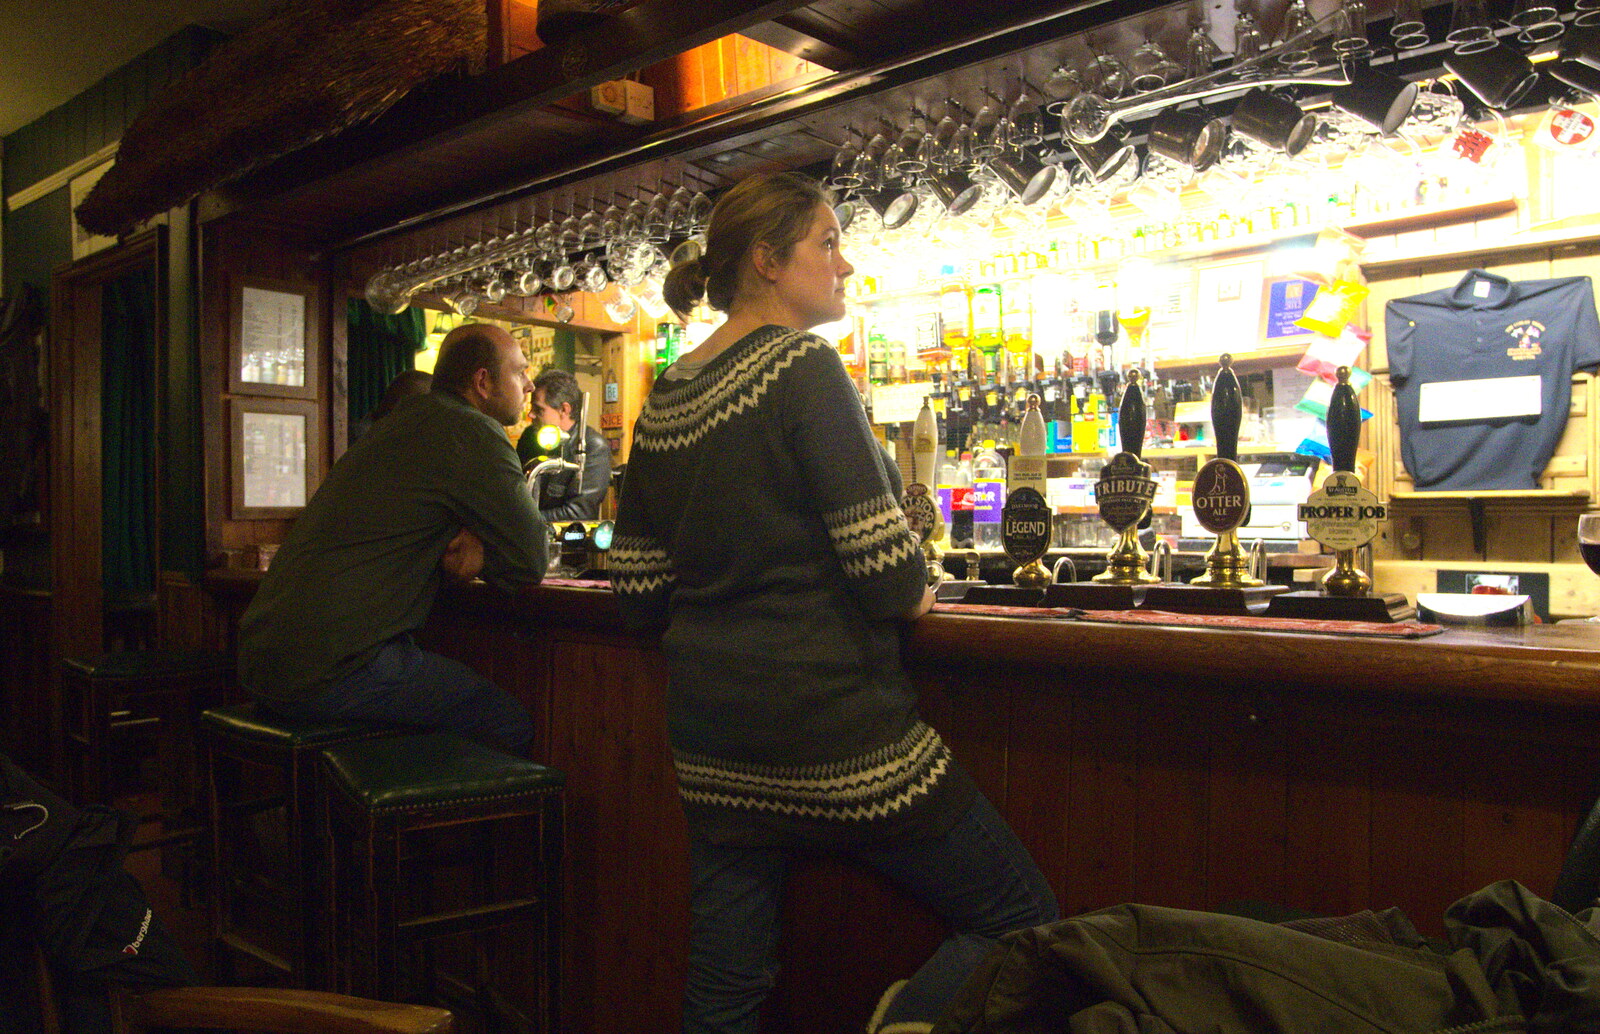 Isobel waits for more beer from A Few Days in Spreyton, Devon - 26th October 2013